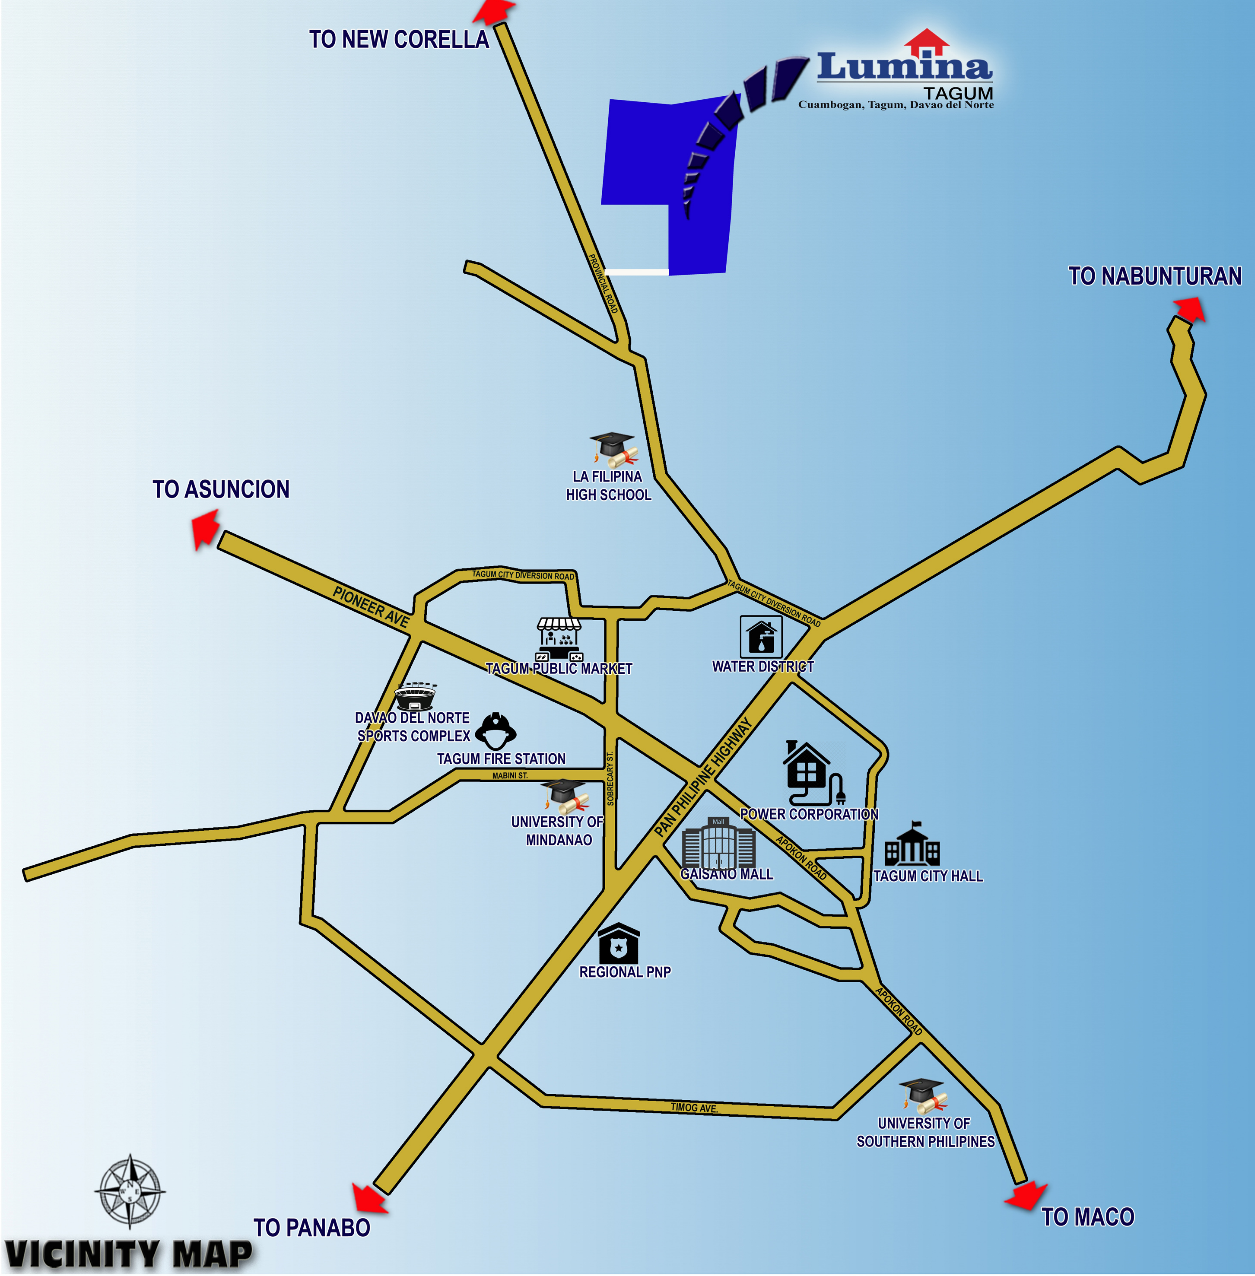 VICINITY-MAP-1642494440.png